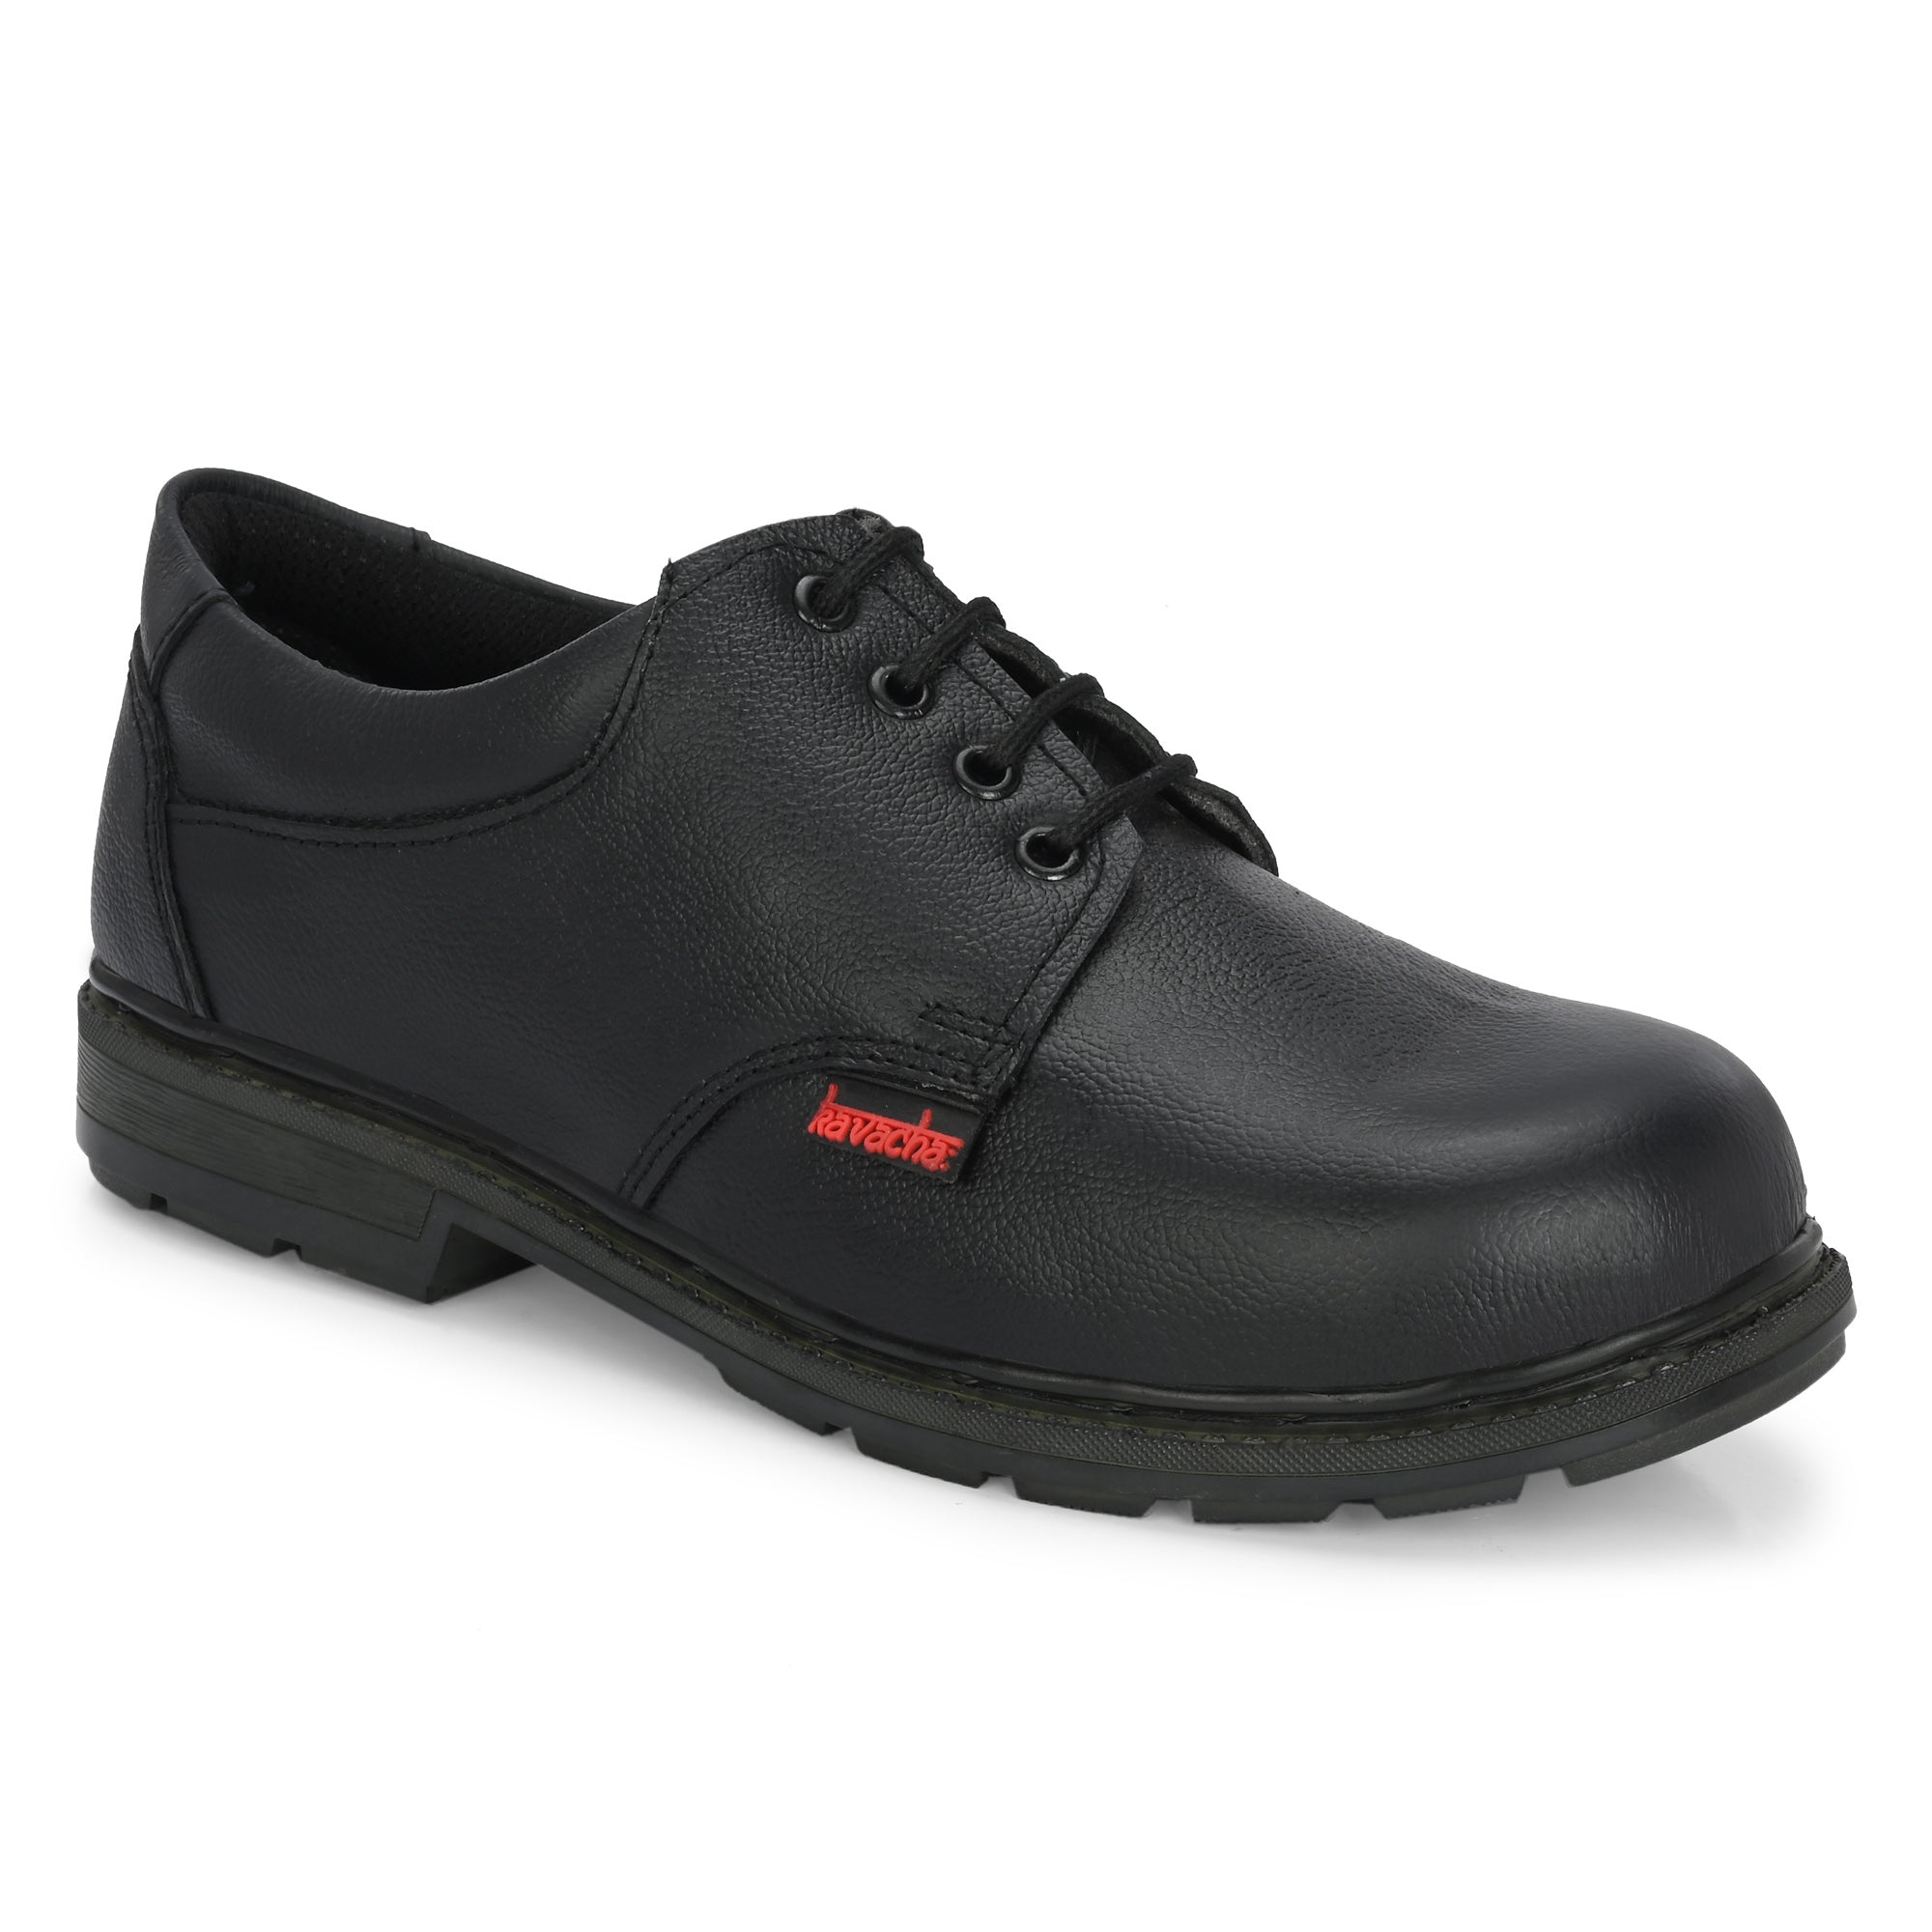 Kavacha S145 Pure Leather Steel Toe Safety Shoe For Men With PVC Sole